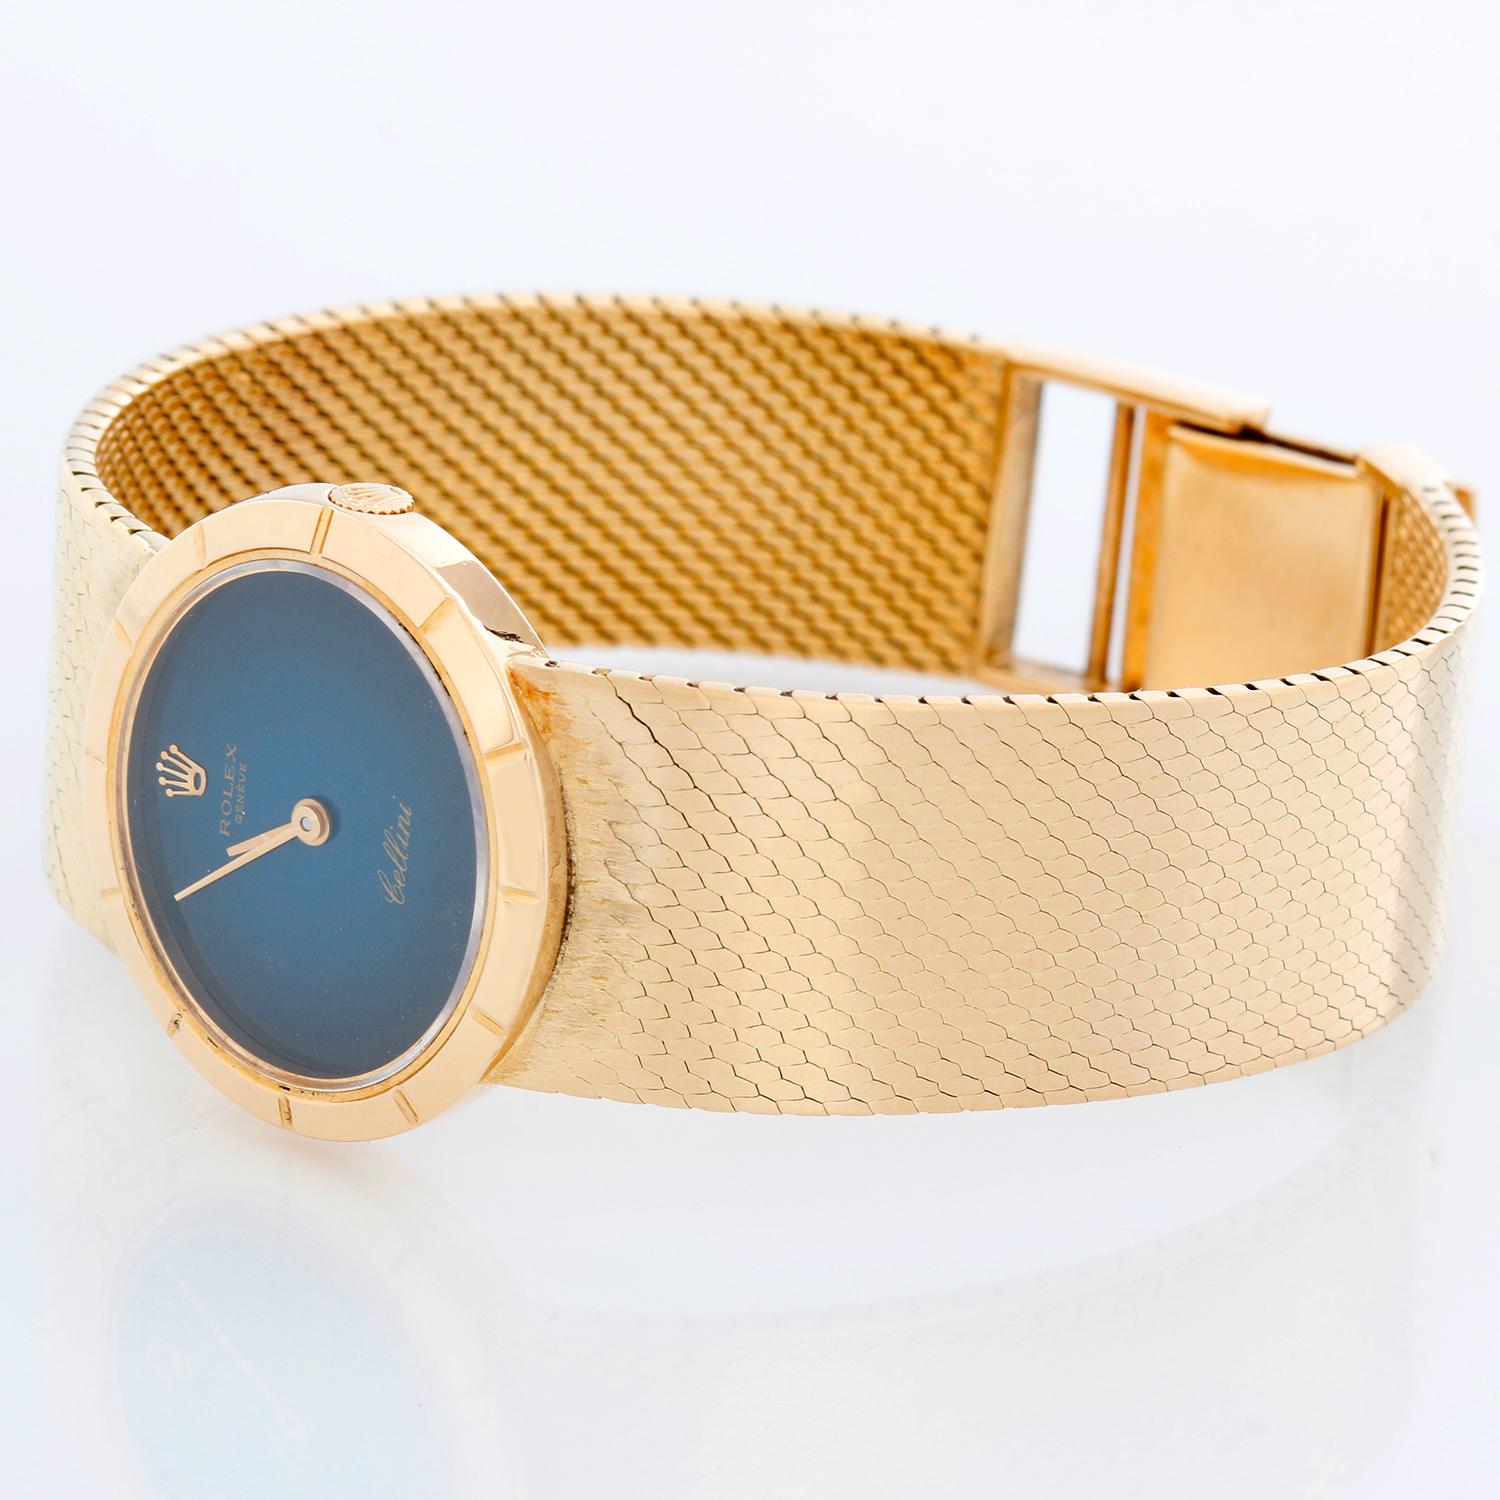 Rolex Cellini 18k Yellow Gold Ladies Dress Watch - Manual winding. 18k yellow gold case (32mm diameter). Blue dial with gold hands. Integrated gold mesh style bracelet (6 1/2 inches). Pre-owned with custom box.